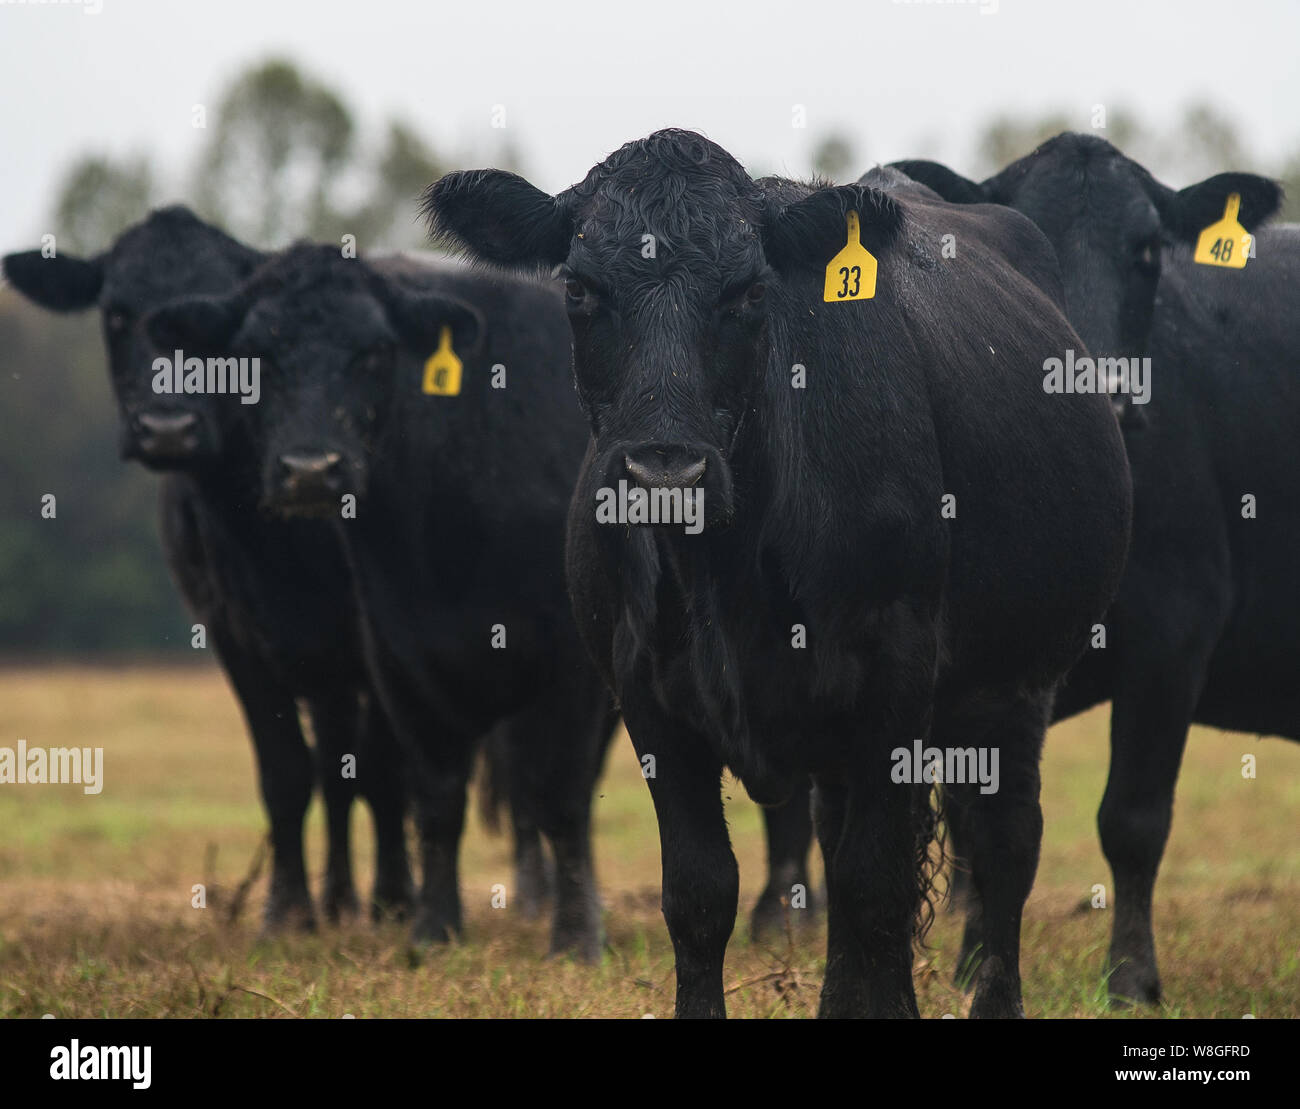 Close up of a black angus cow looking into the camera with yellow identification tag Stock Photo